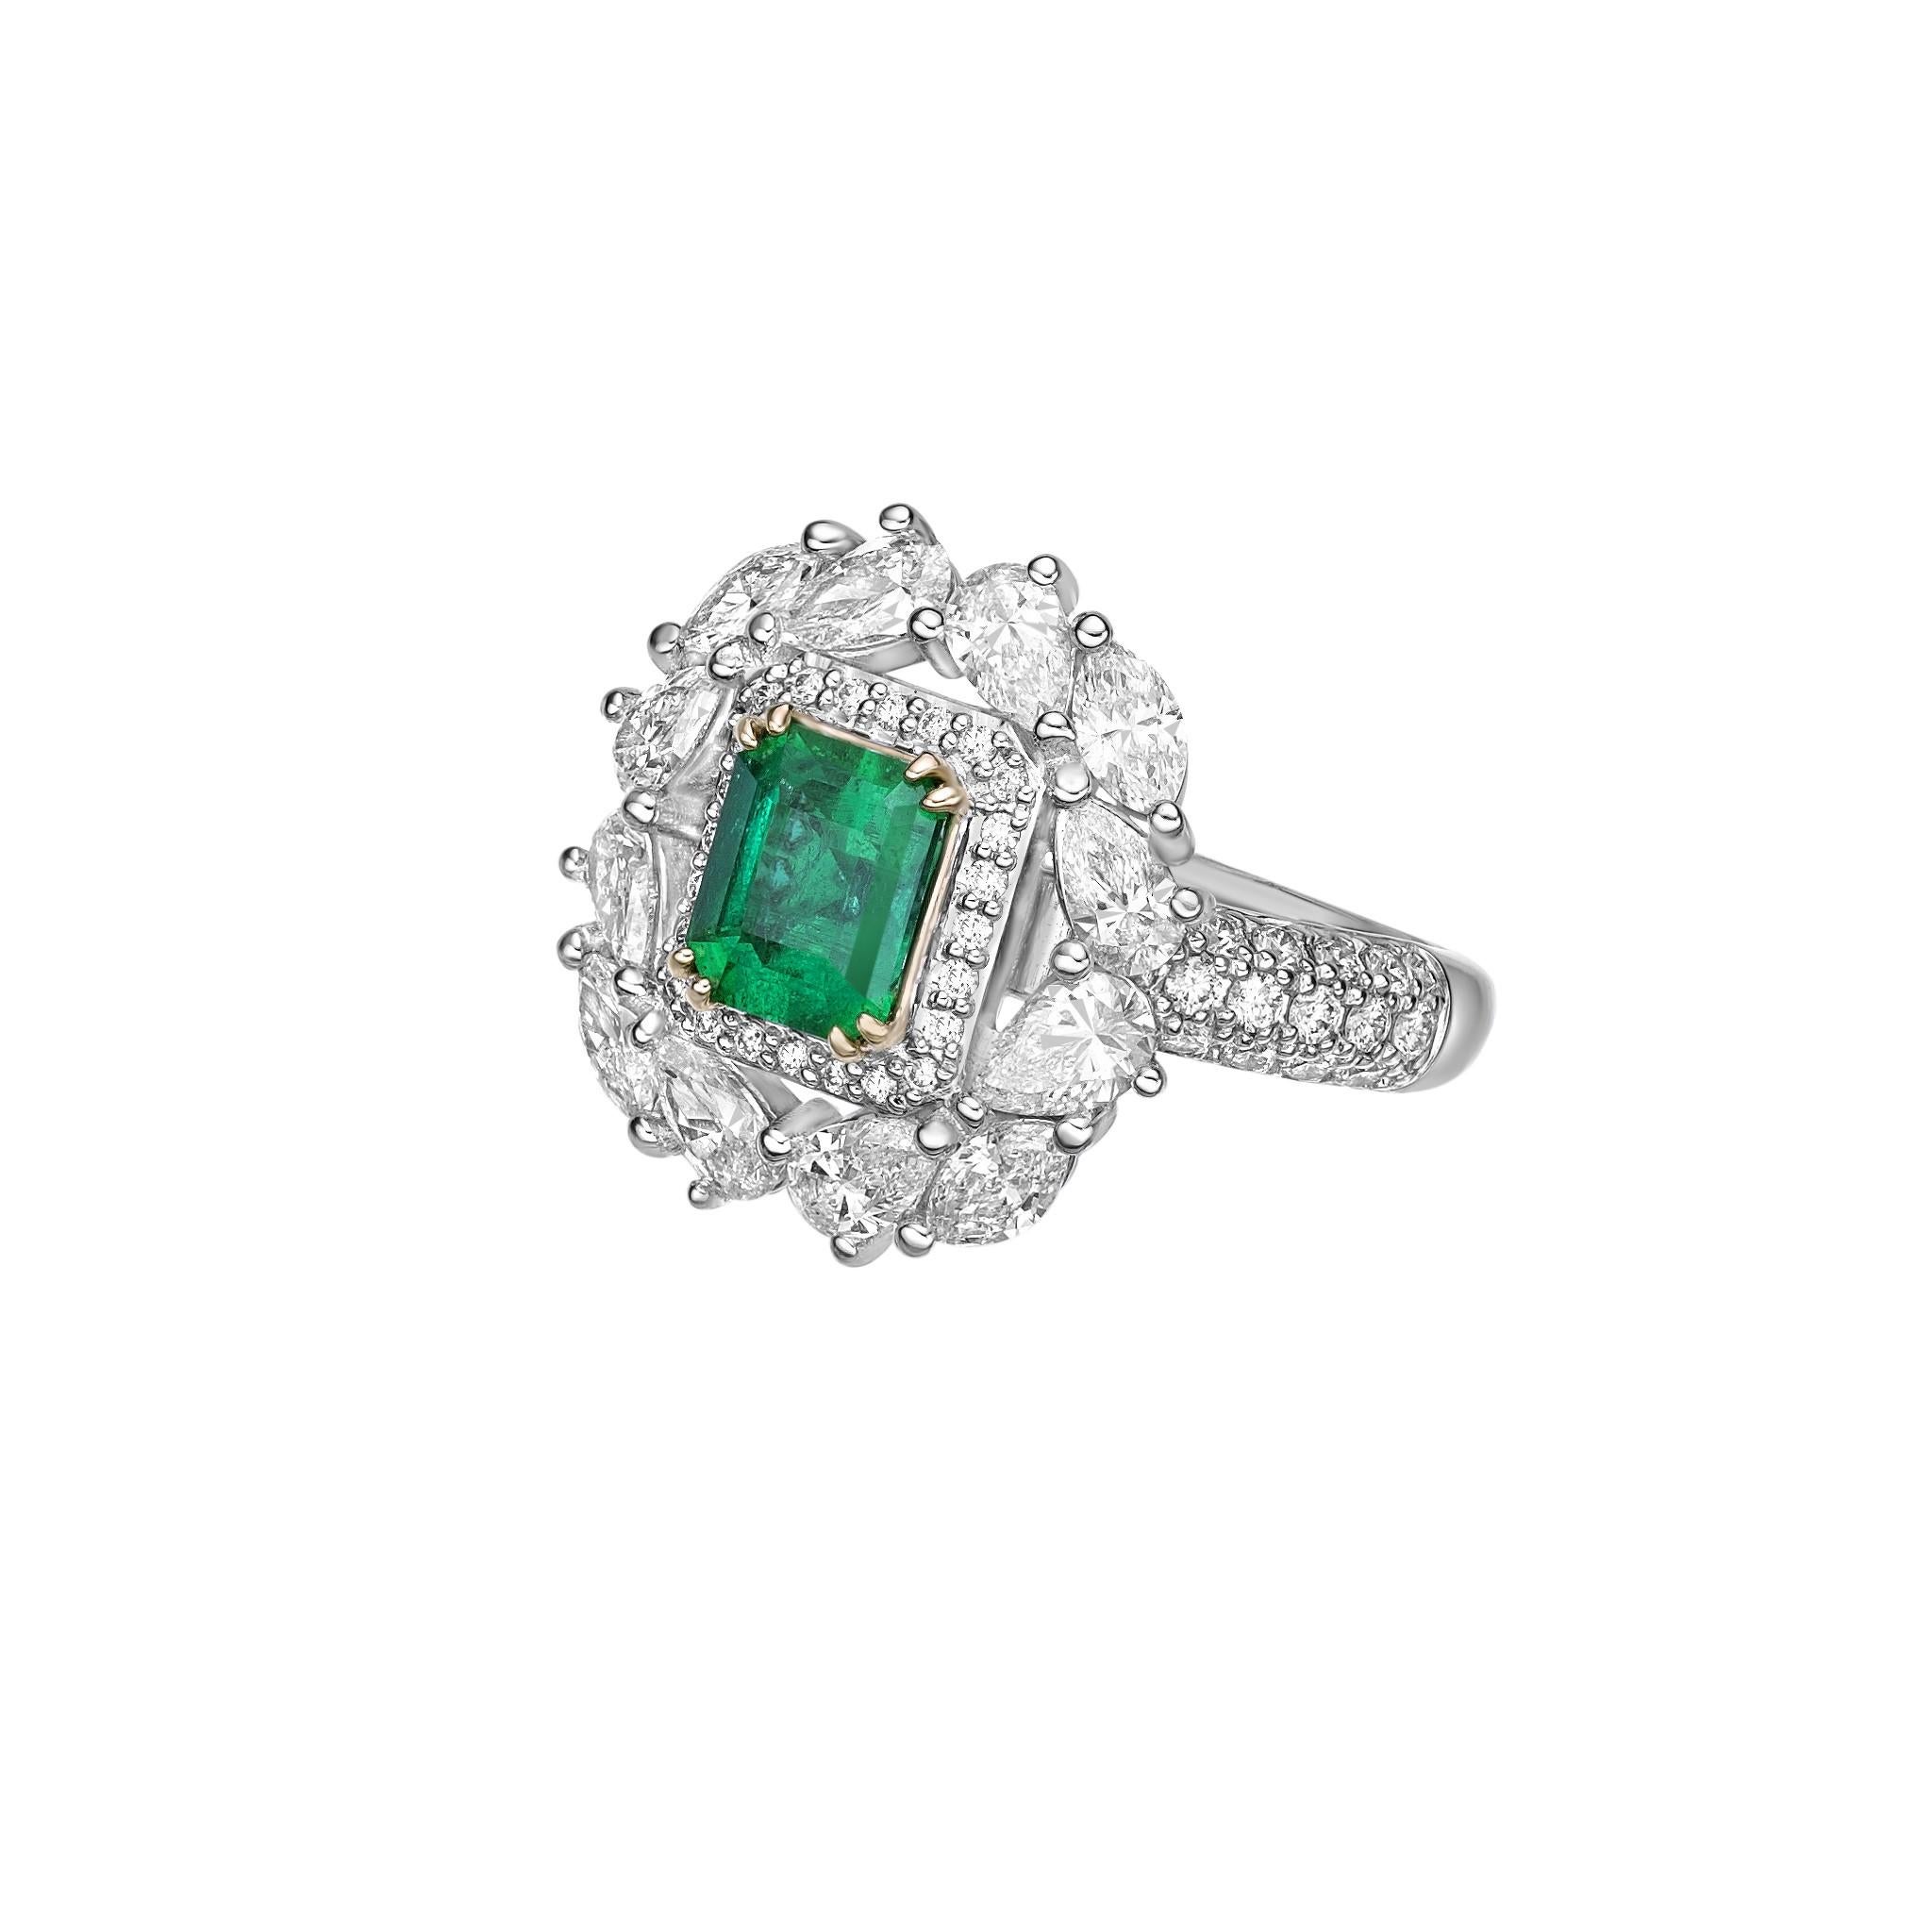 Octagon Cut 1.13 Carat Sunflower Emerald Bridal Ring in 18KWYG with White Diamond. For Sale